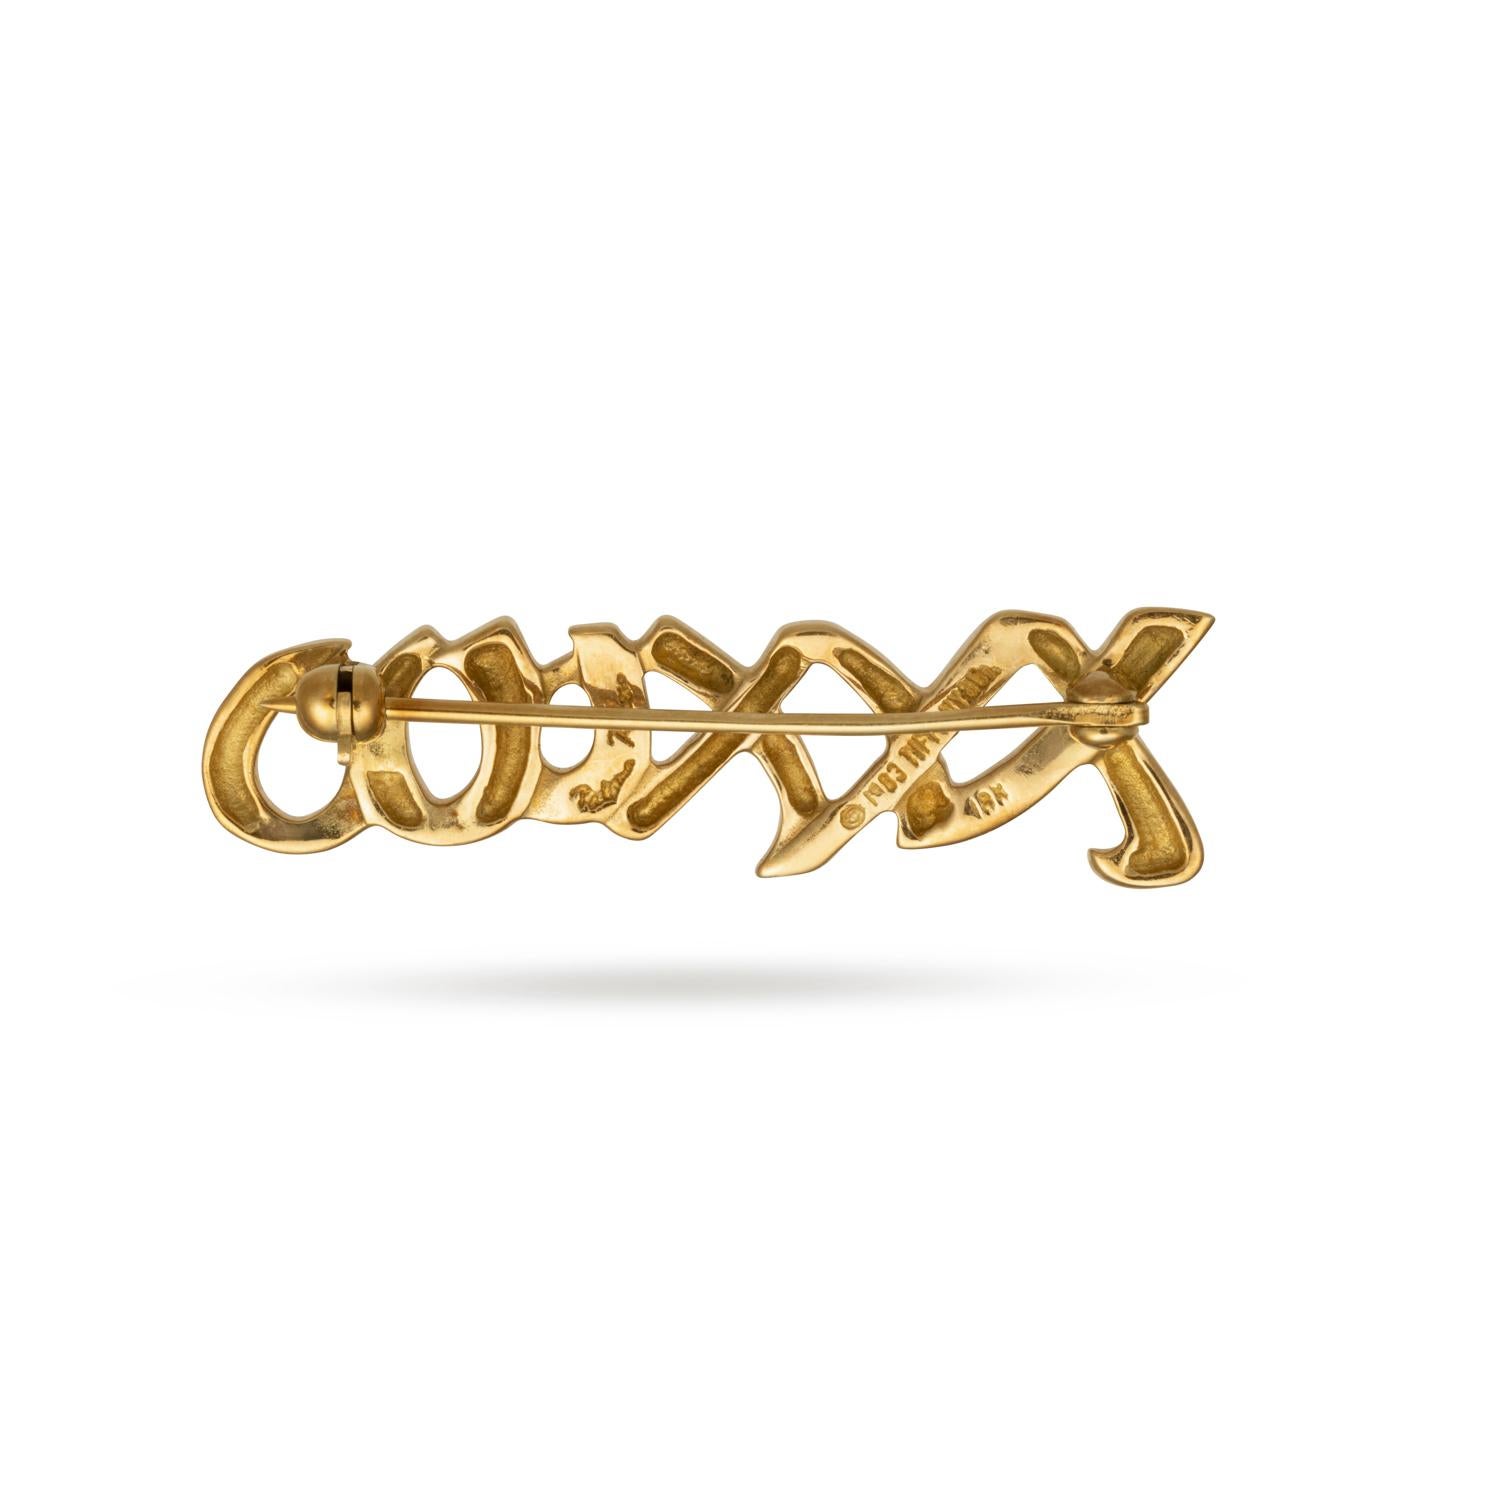 Elevate your style with an iconic piece of jewelry from the legendary Tiffany & Co. Introducing the Paloma Picasso Collection Love Kisses Brooch, a testament to elegance and timeless design. Crafted in 18K gold, this exquisite brooch features the